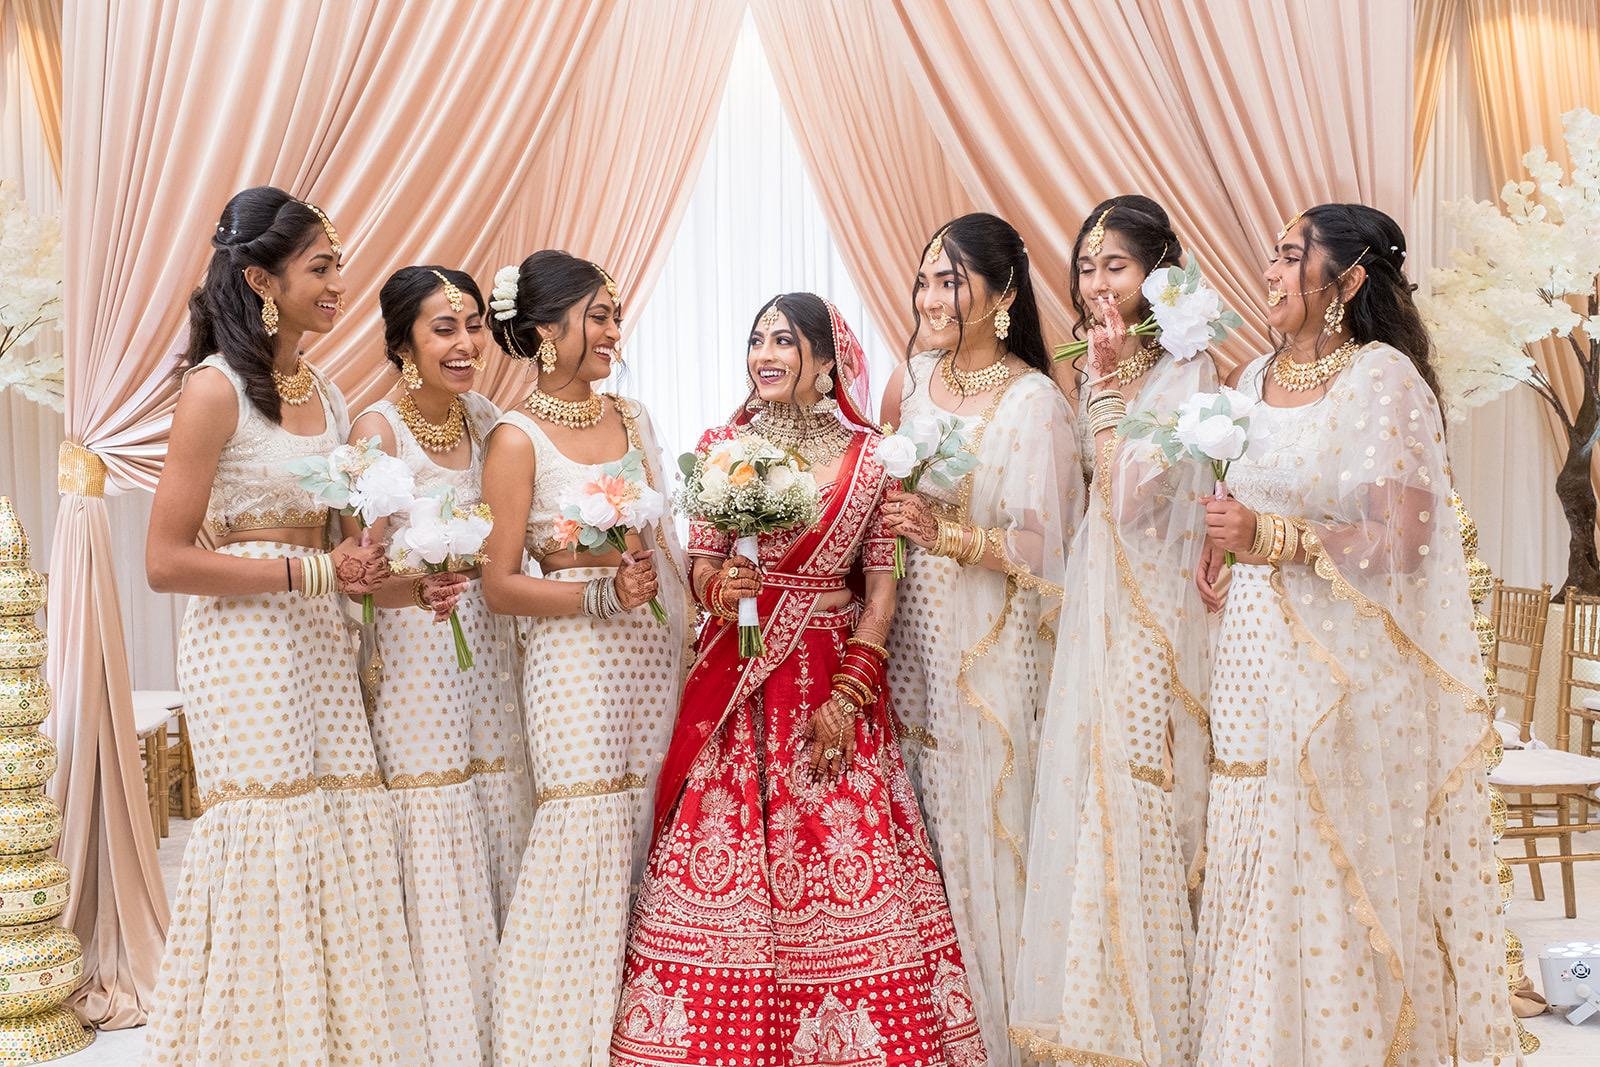 LCW - Chicago South Asian Weddings - Sonu and Daman - Portraits Ceremony-77.jpg